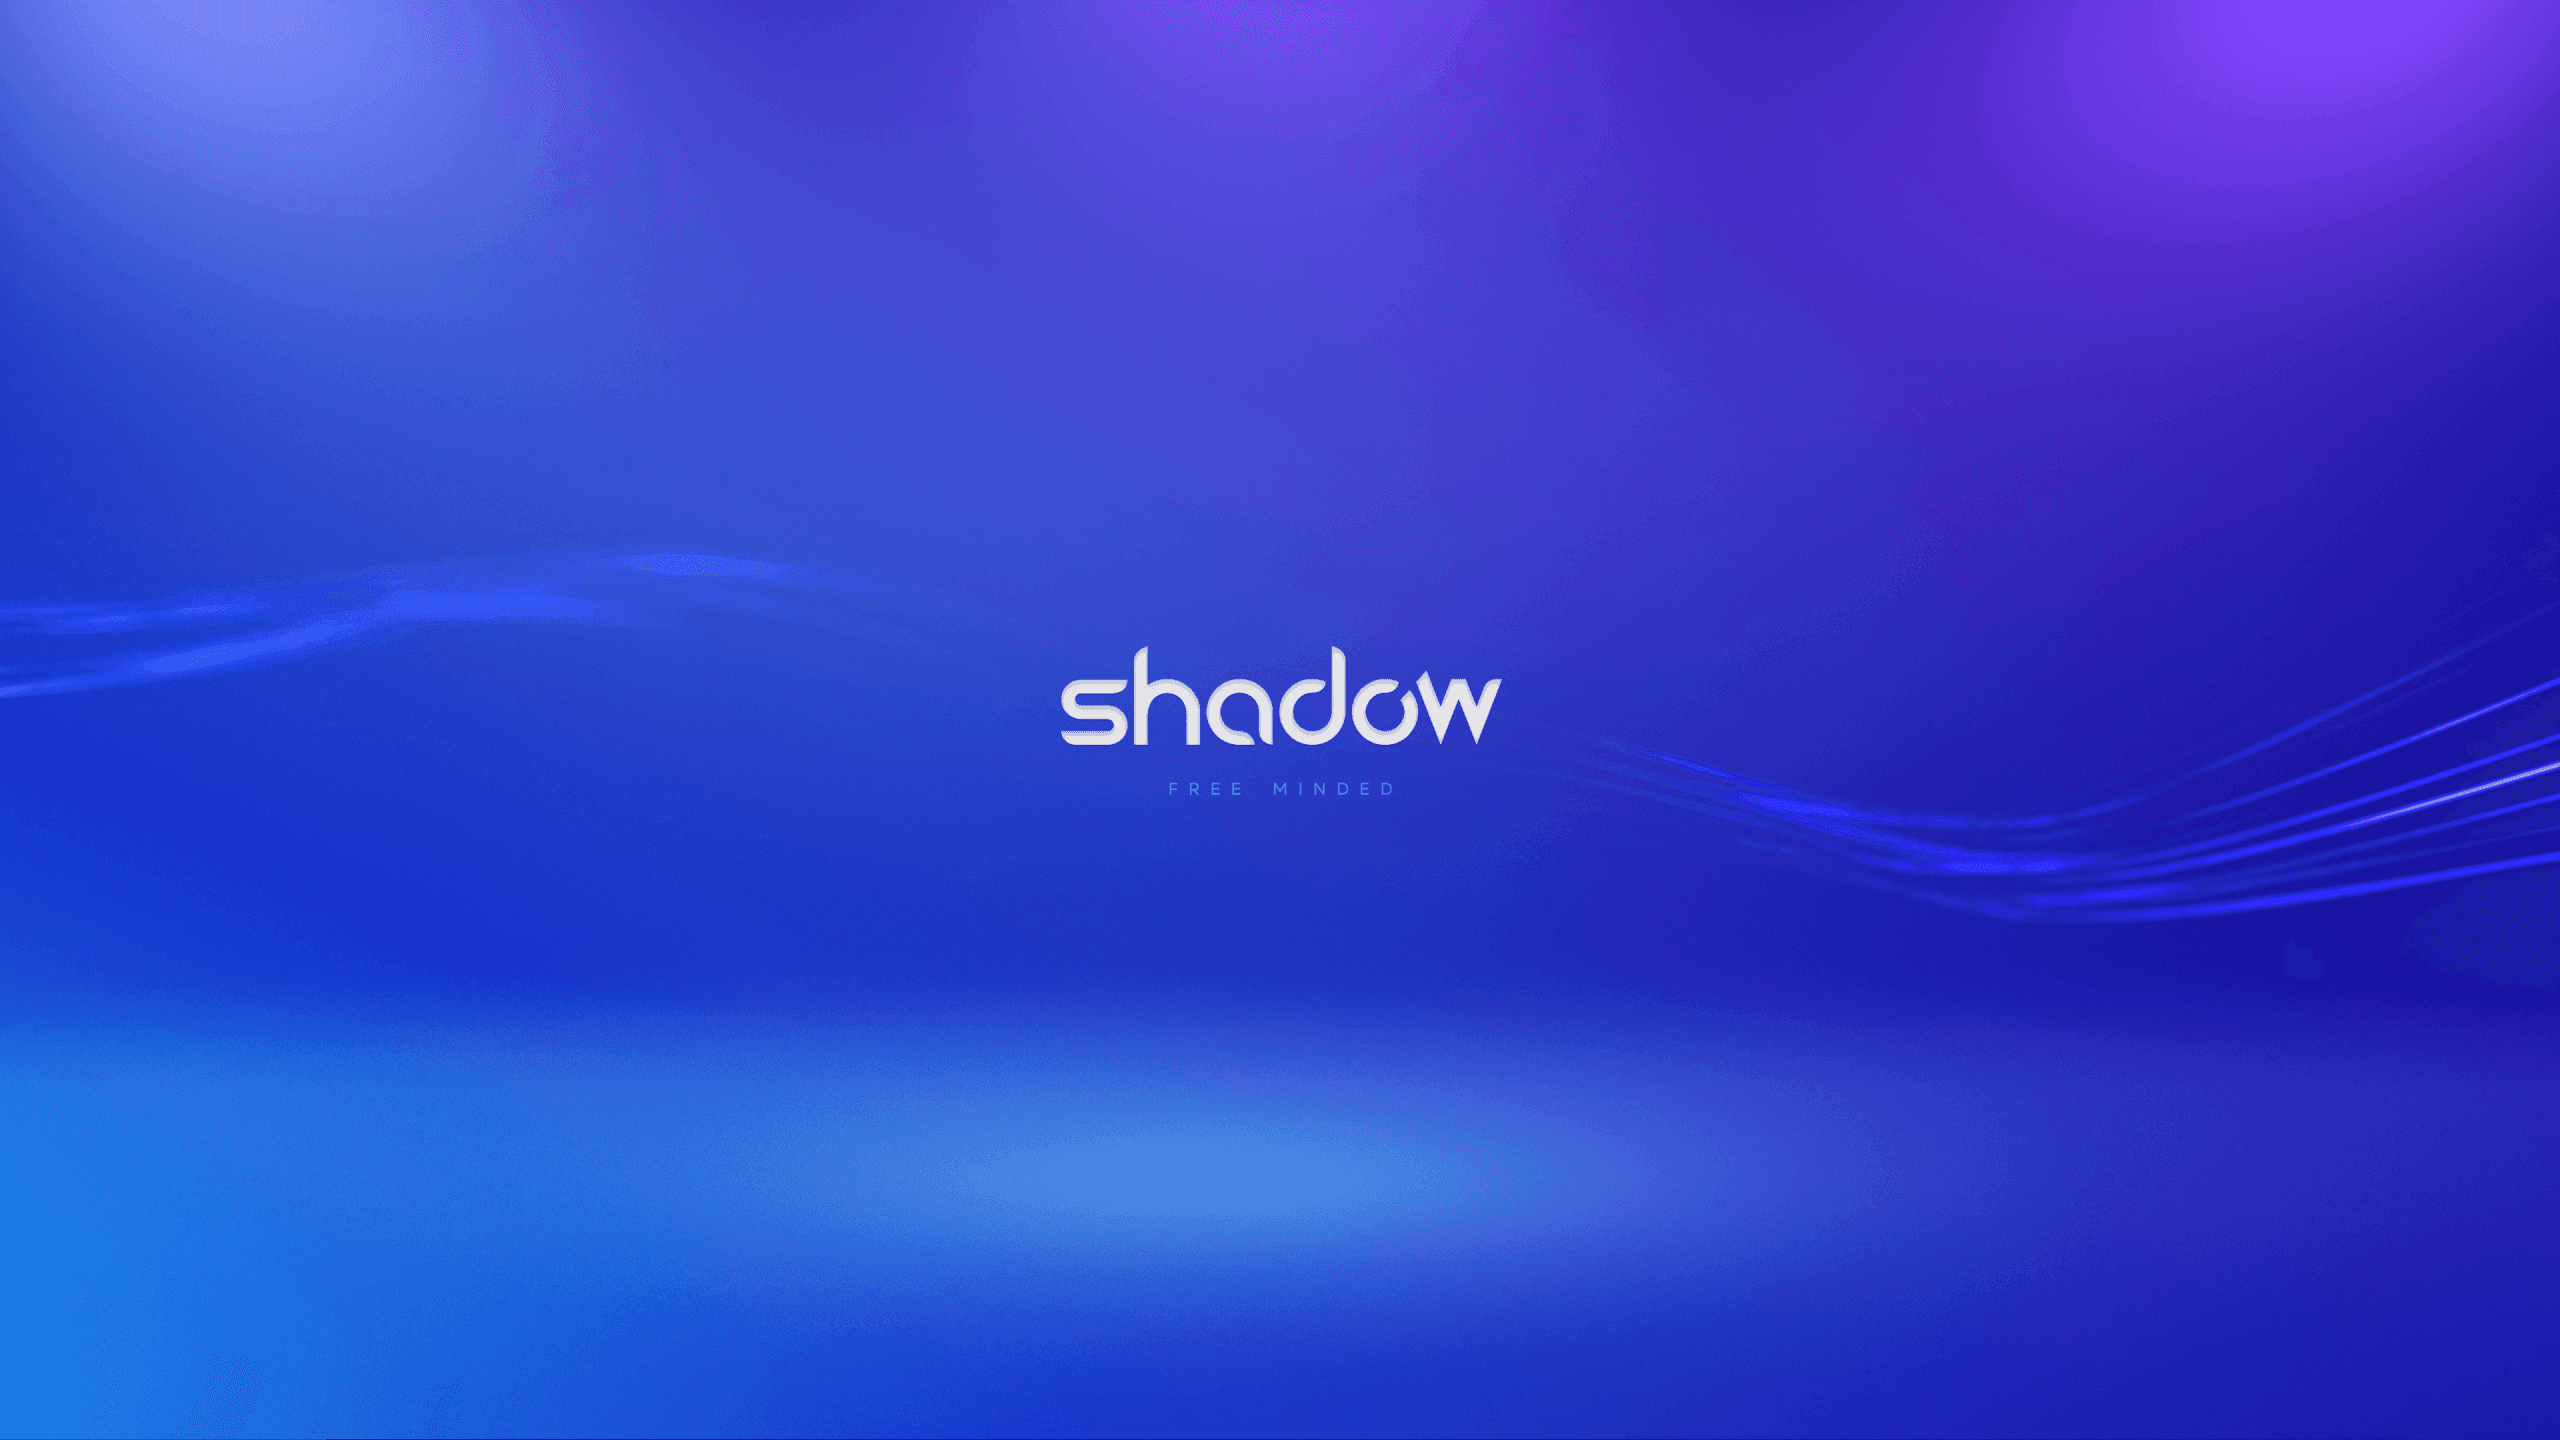 shadow free minded